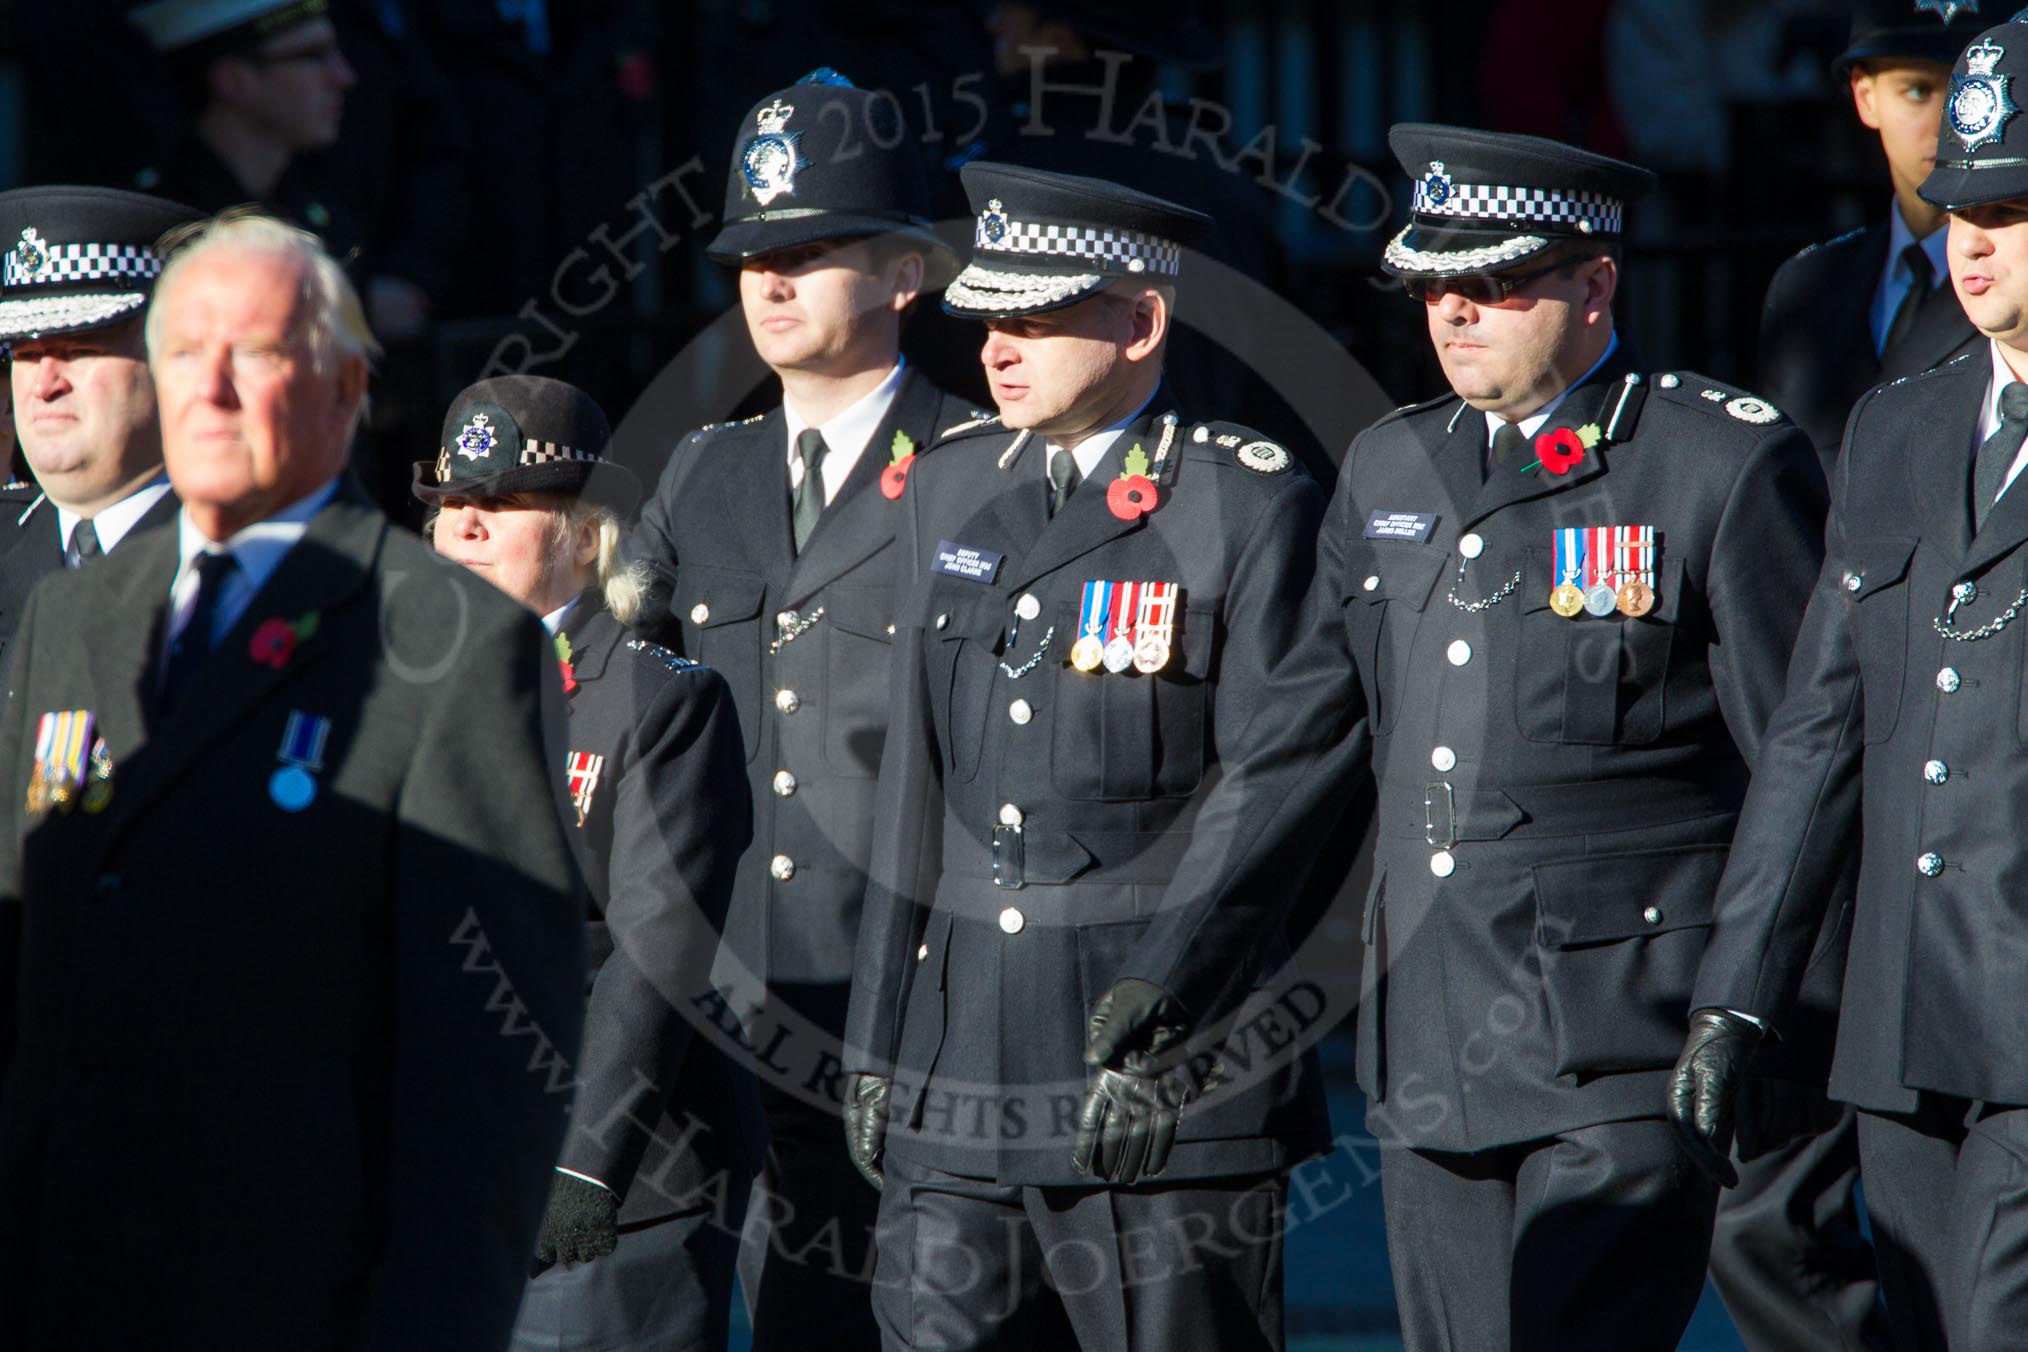 Remembrance Sunday Cenotaph March Past 2013: M13 - Metropolitan Special Constabulary. Special Sergeant Patricia Johnson, Deputy Chief Officer John Clarke, and Assistant Chief Officer James Deller..
Press stand opposite the Foreign Office building, Whitehall, London SW1,
London,
Greater London,
United Kingdom,
on 10 November 2013 at 12:10, image #1958